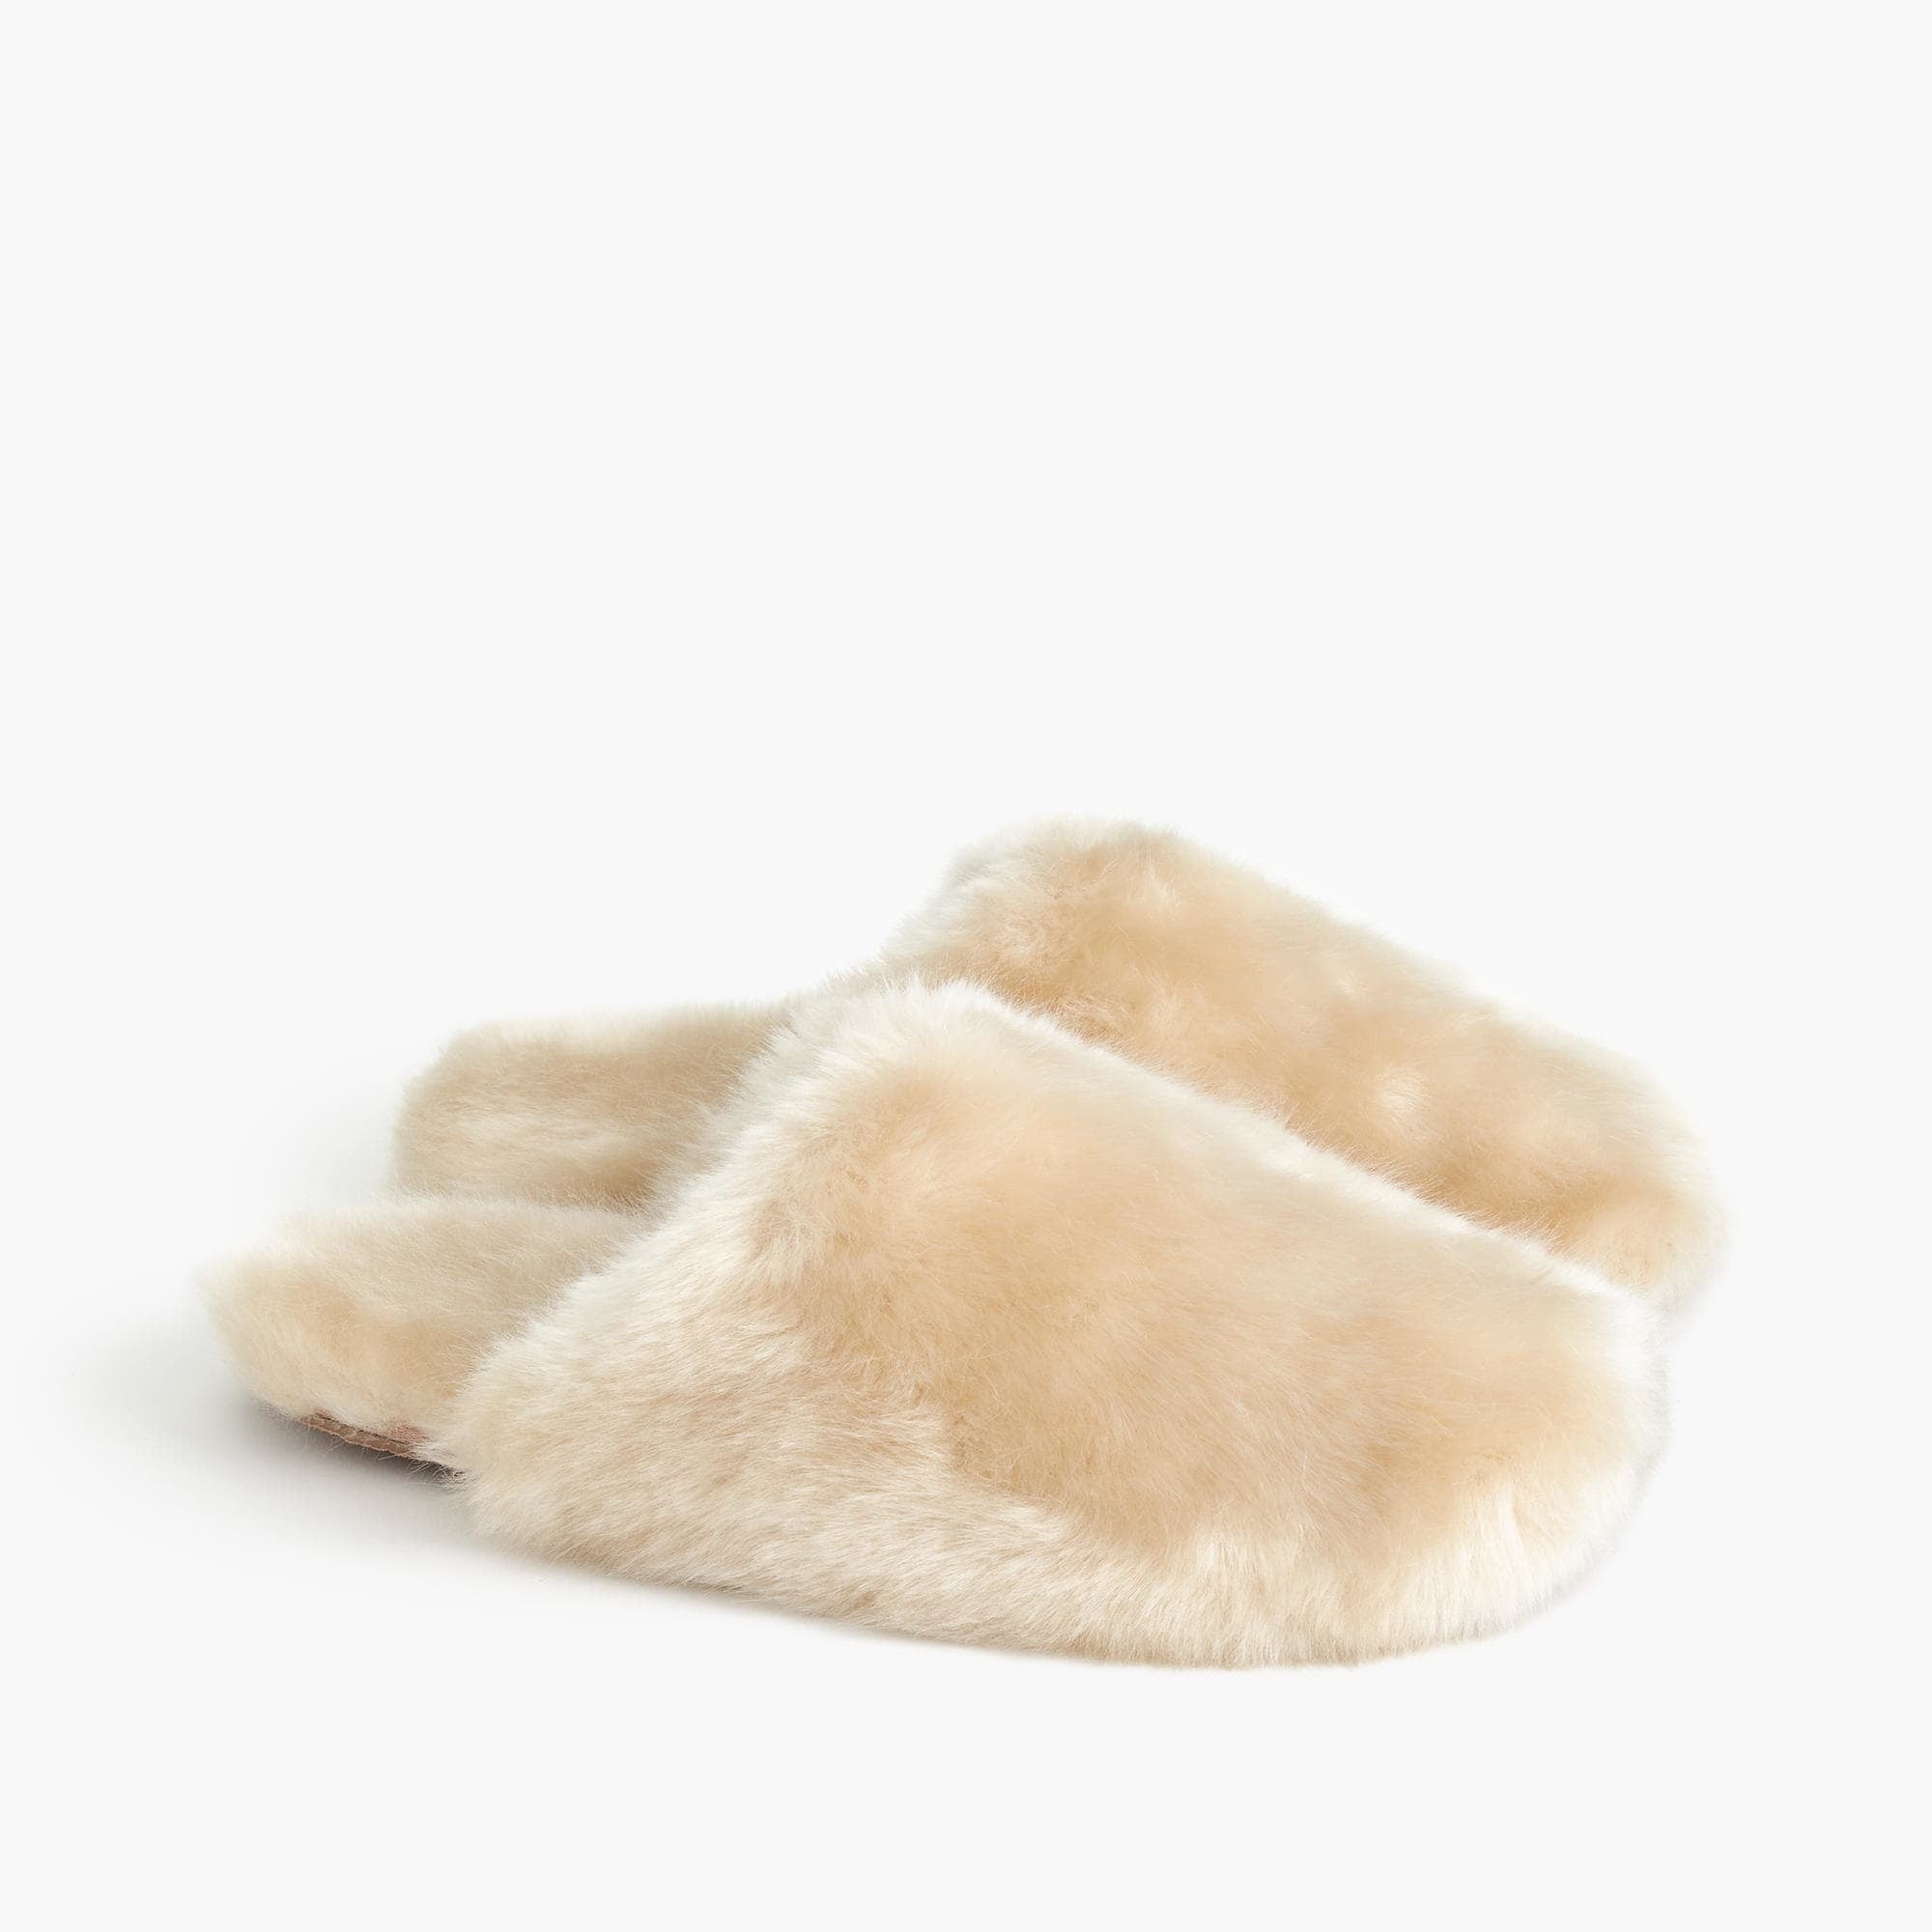 J.Crew Fuzzy Slippers | 14 Stylish and 